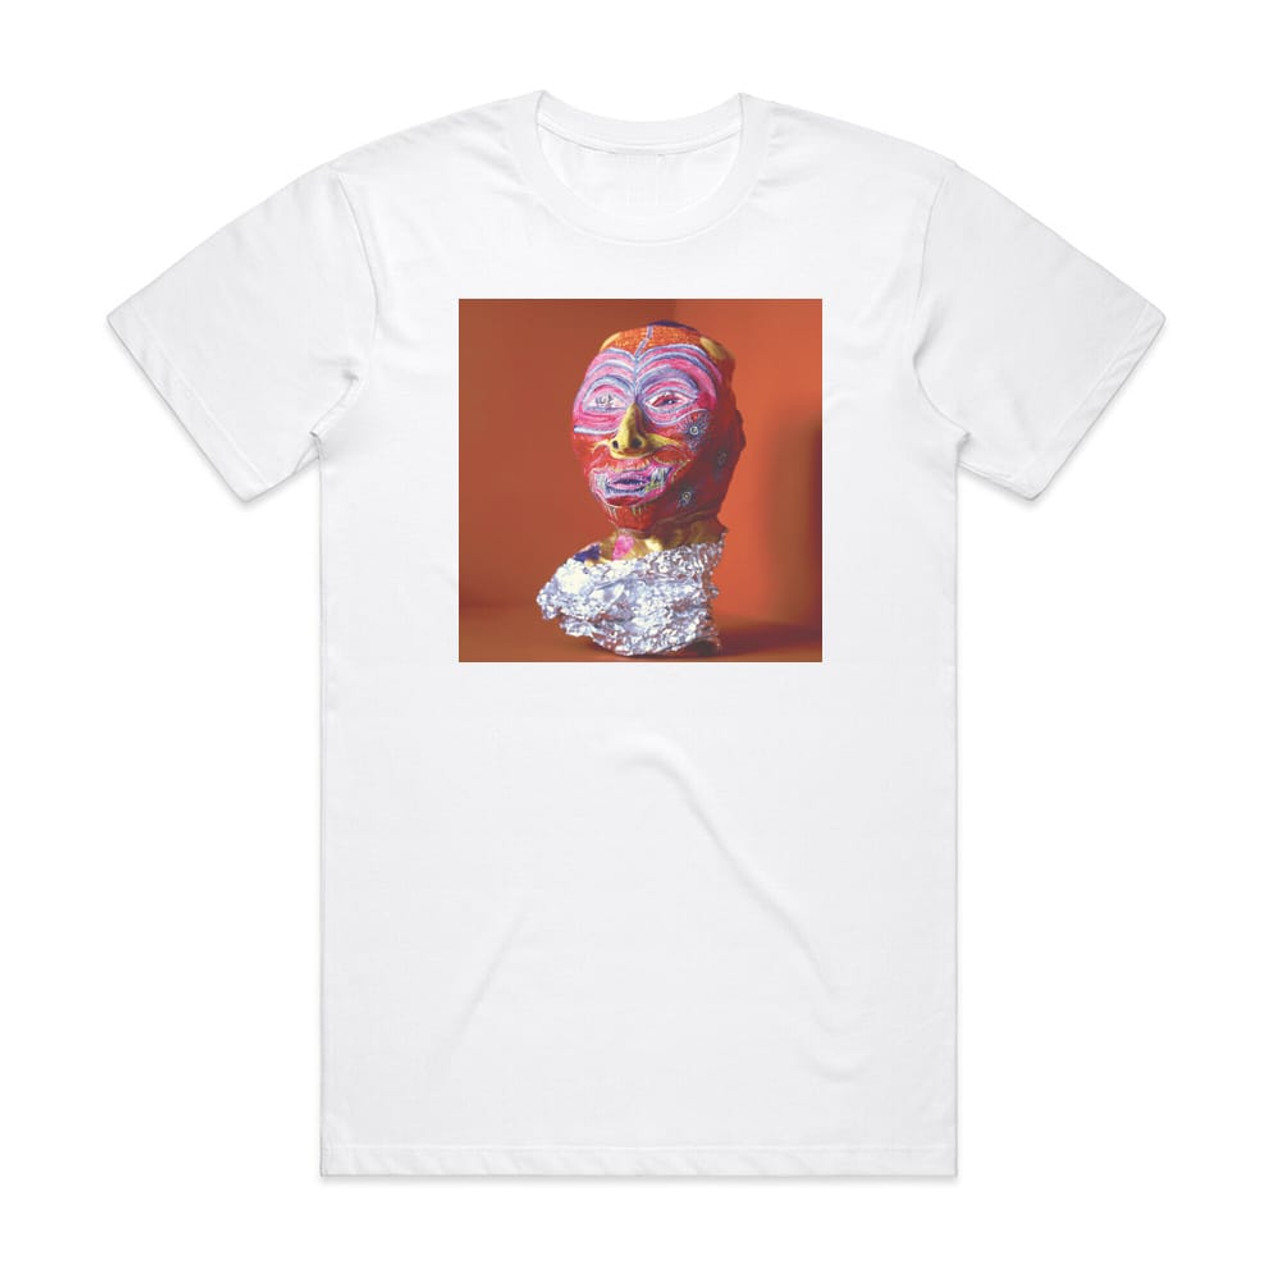 The Wytches Annabel Dream Reader Album Cover T-Shirt White